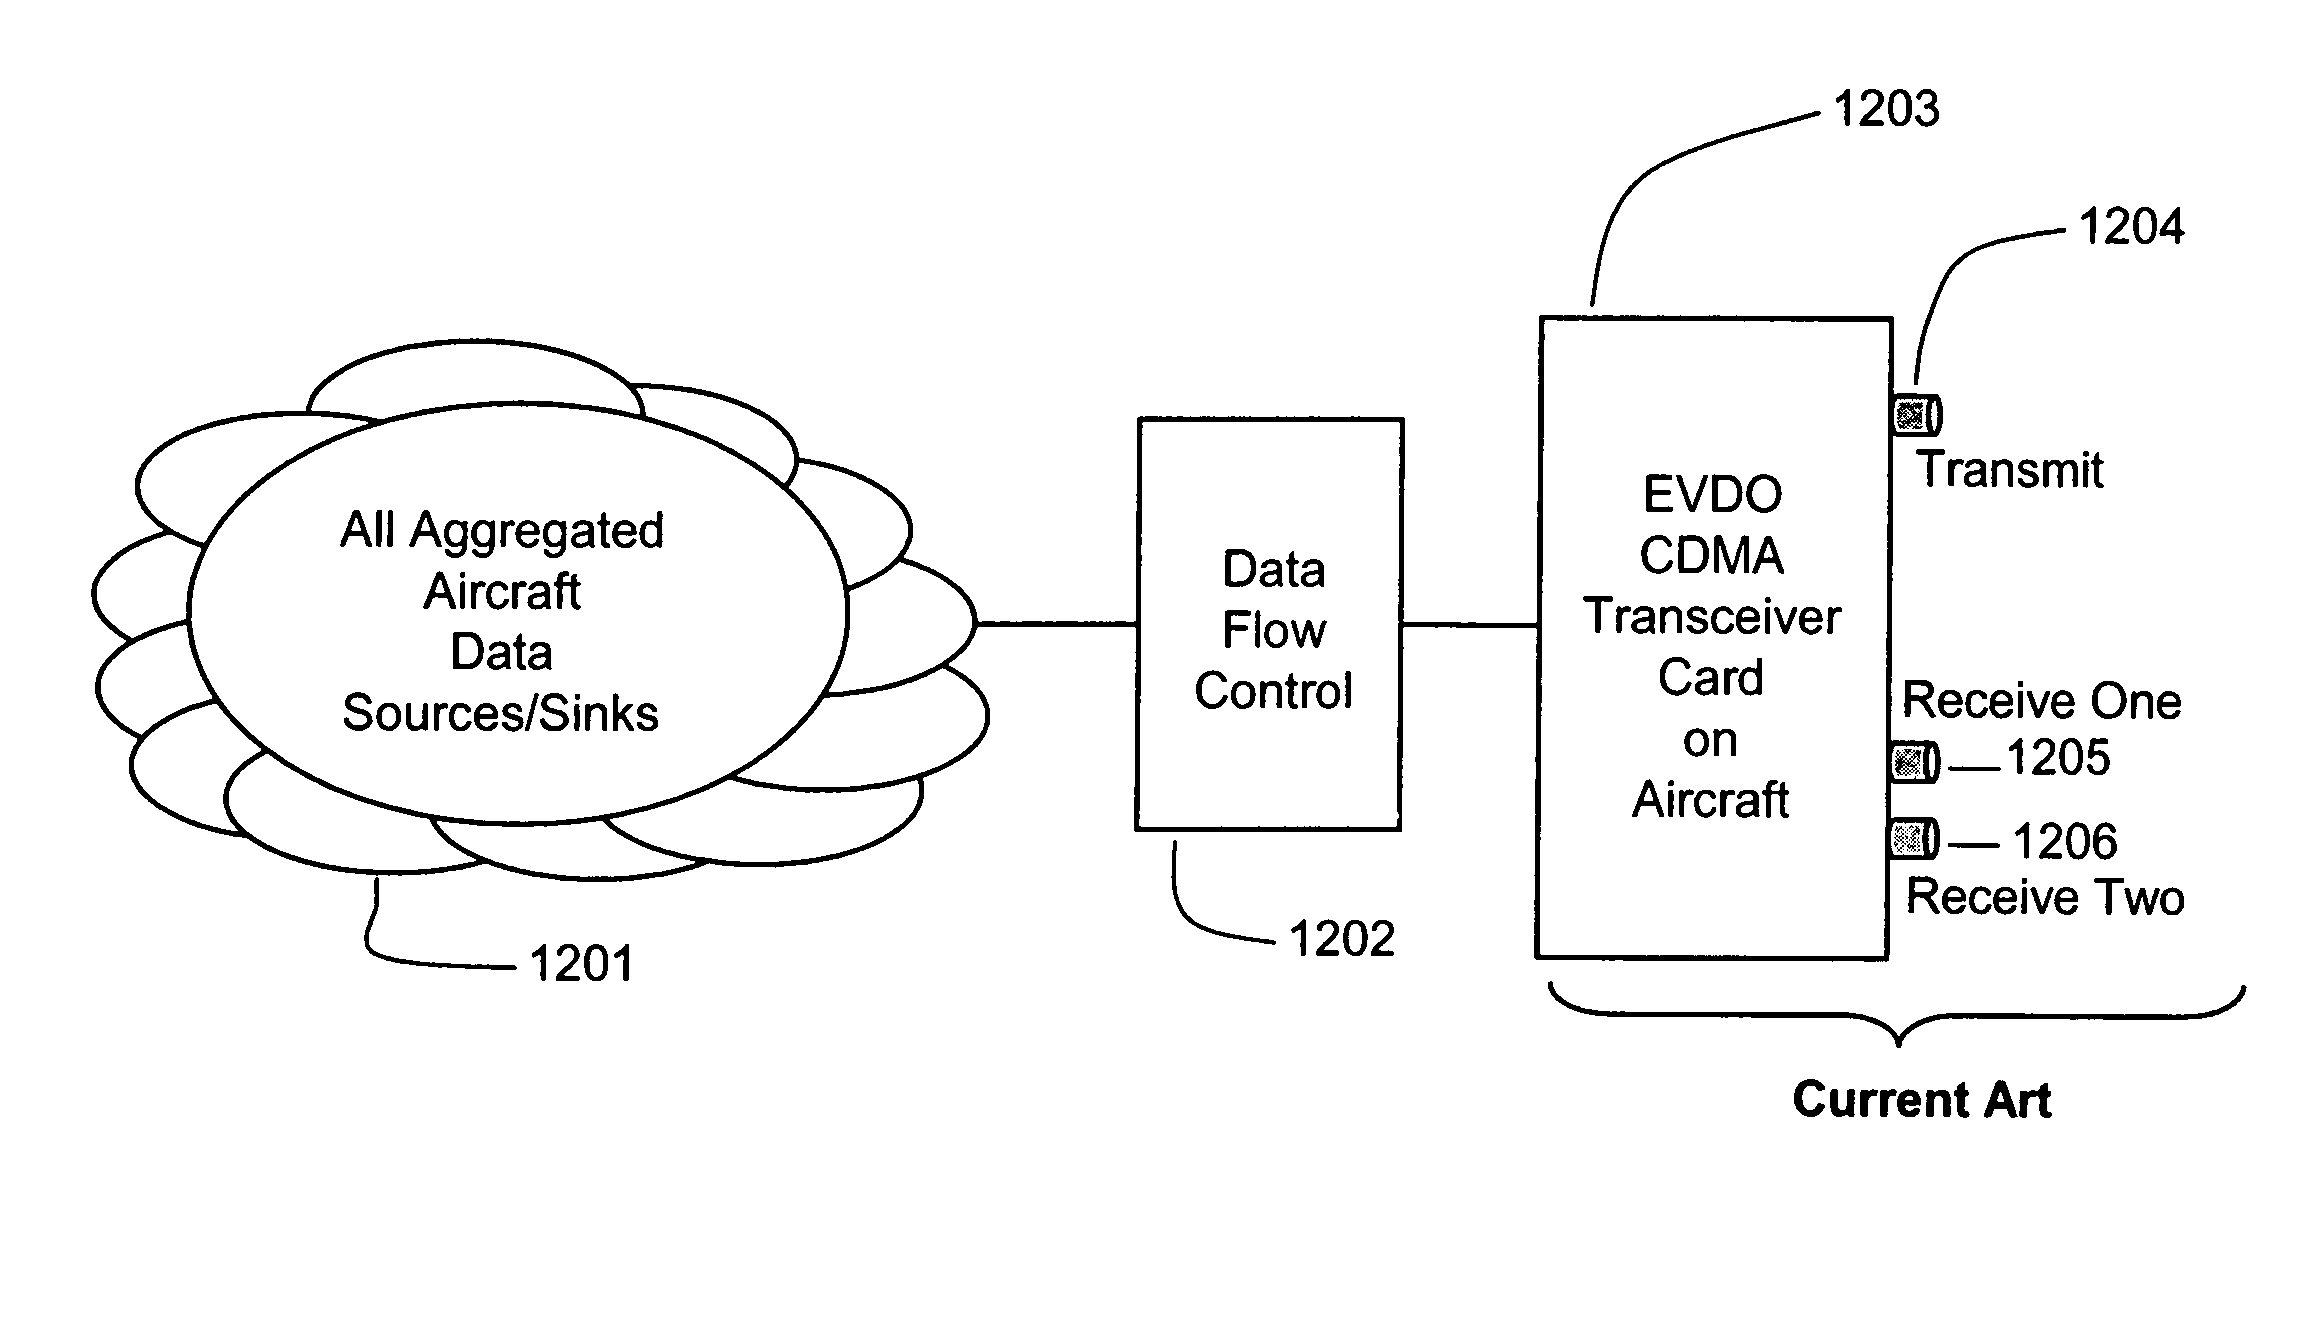 Multi-link aircraft cellular system for simultaneous communication with multiple terrestrial cell sites